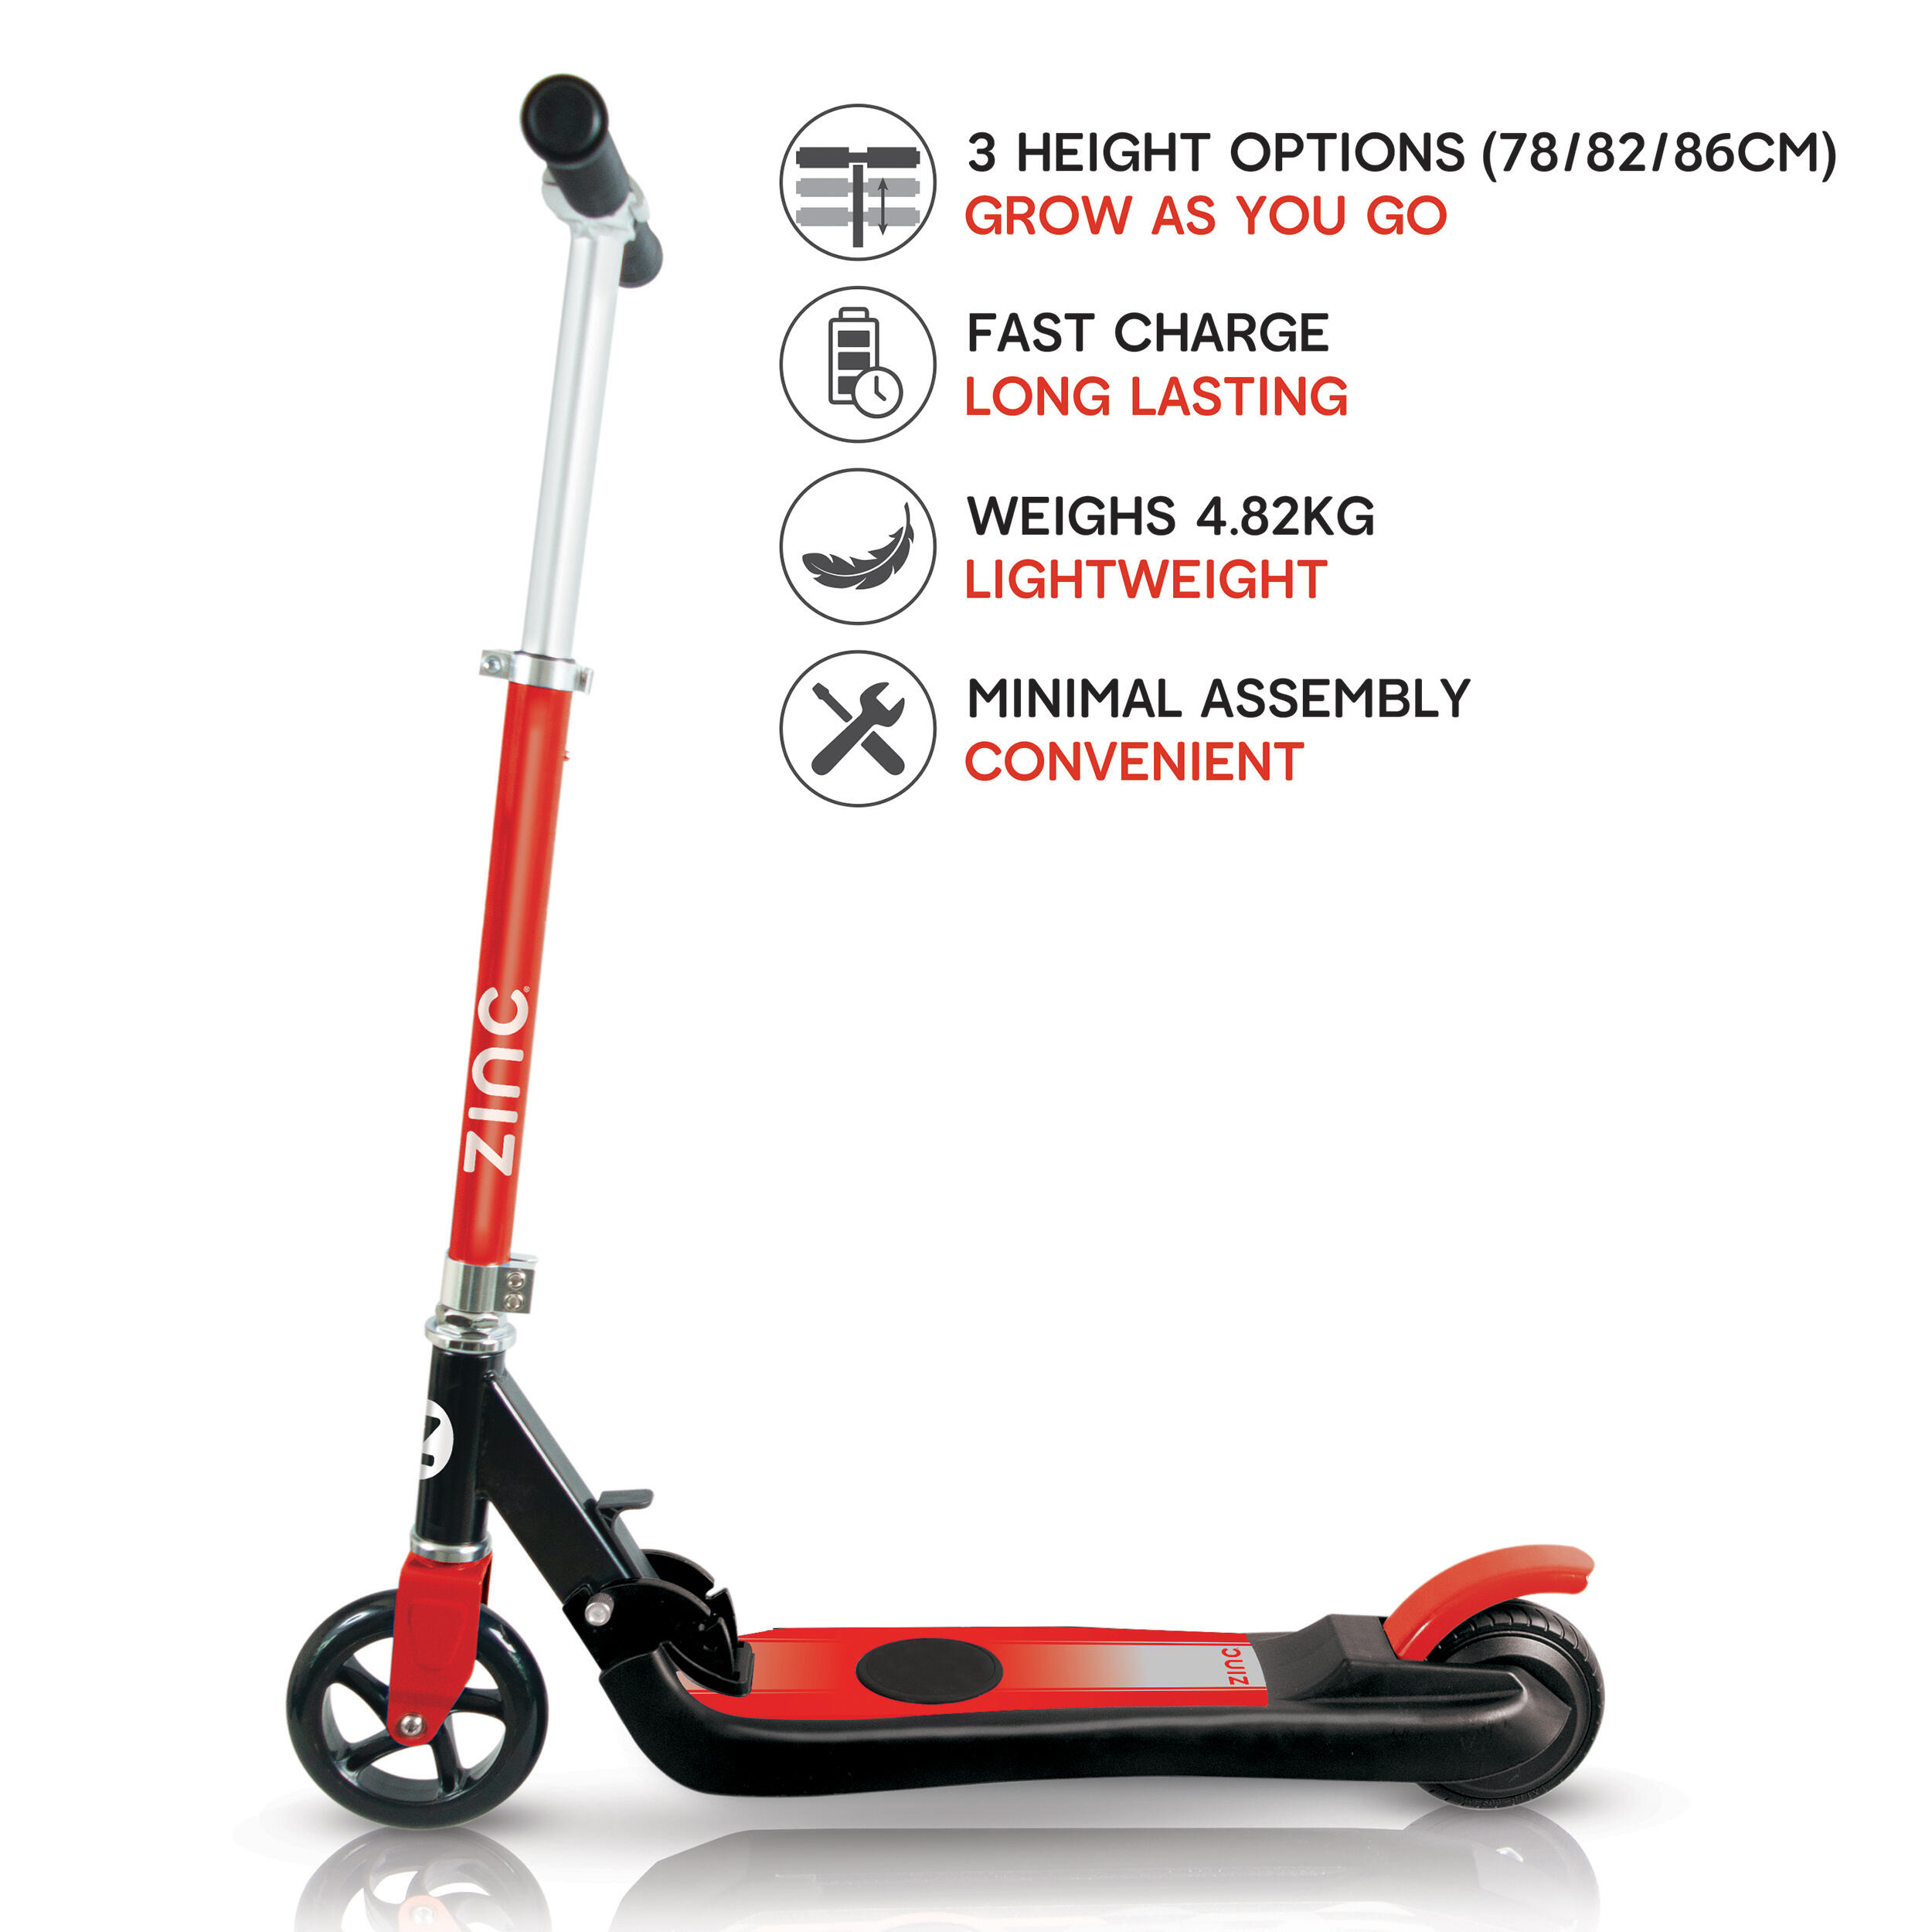 Zinc e4 electric scooter - Red 3/3